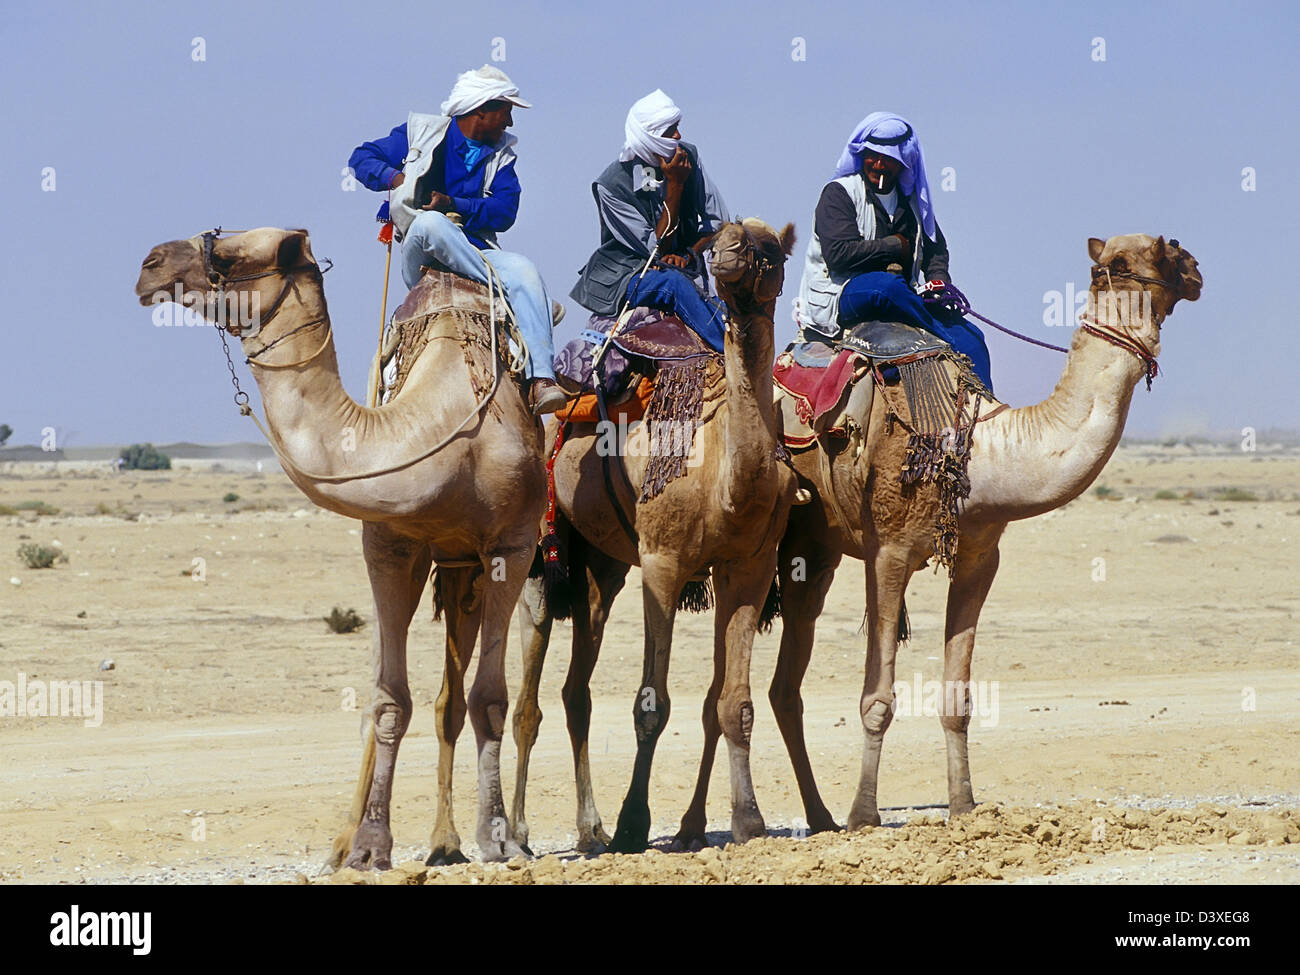 Beduins seat on Camels in the Negev Israel Stock Photo